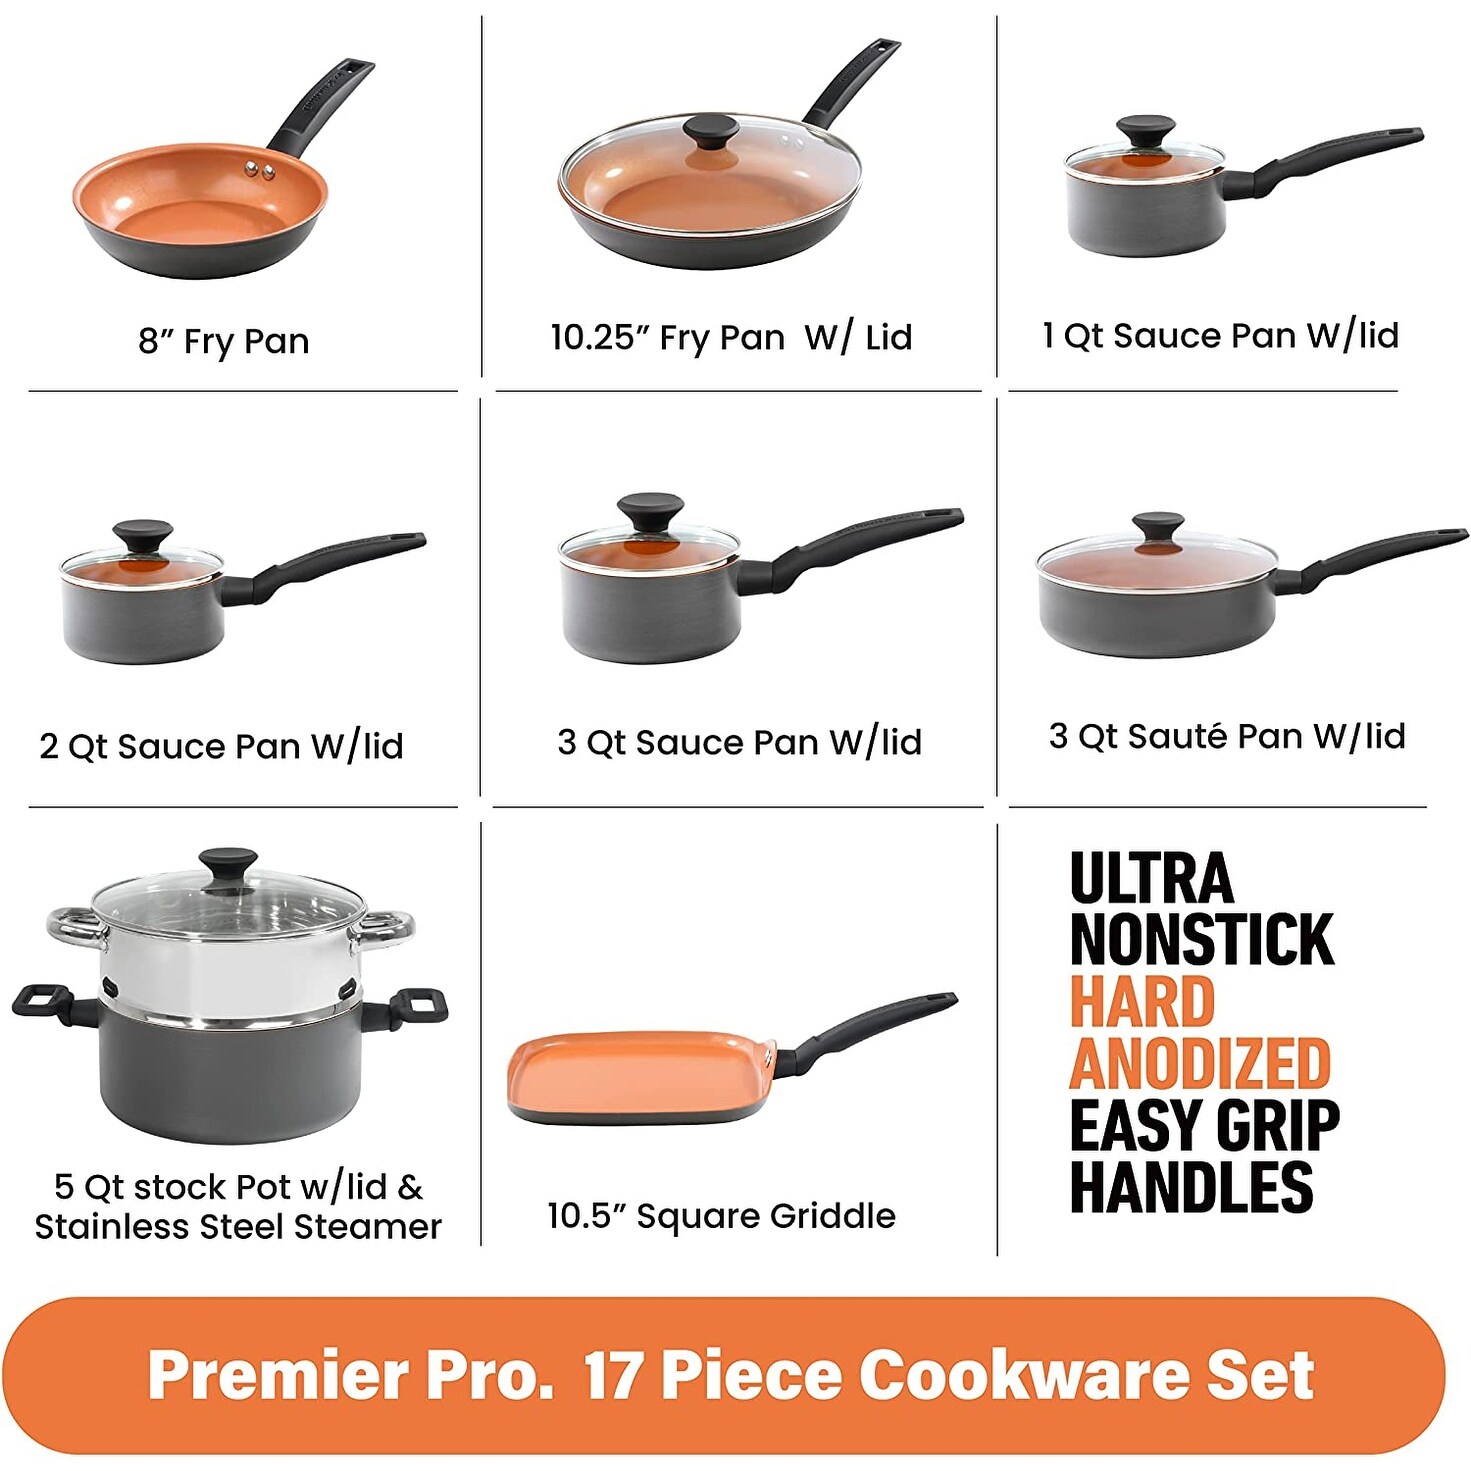 https://ak1.ostkcdn.com/images/products/is/images/direct/f81b3aaa4f12f478d9974fe1dfed8377d21fdf68/Gotham-Steel-Pro-Premier-Pots-and-Pans-Set-Nonstick%2C-17-Pc-Hard-Anodized-Kitchen-Cookware-Set%2C-Ceramic-Coated.jpg